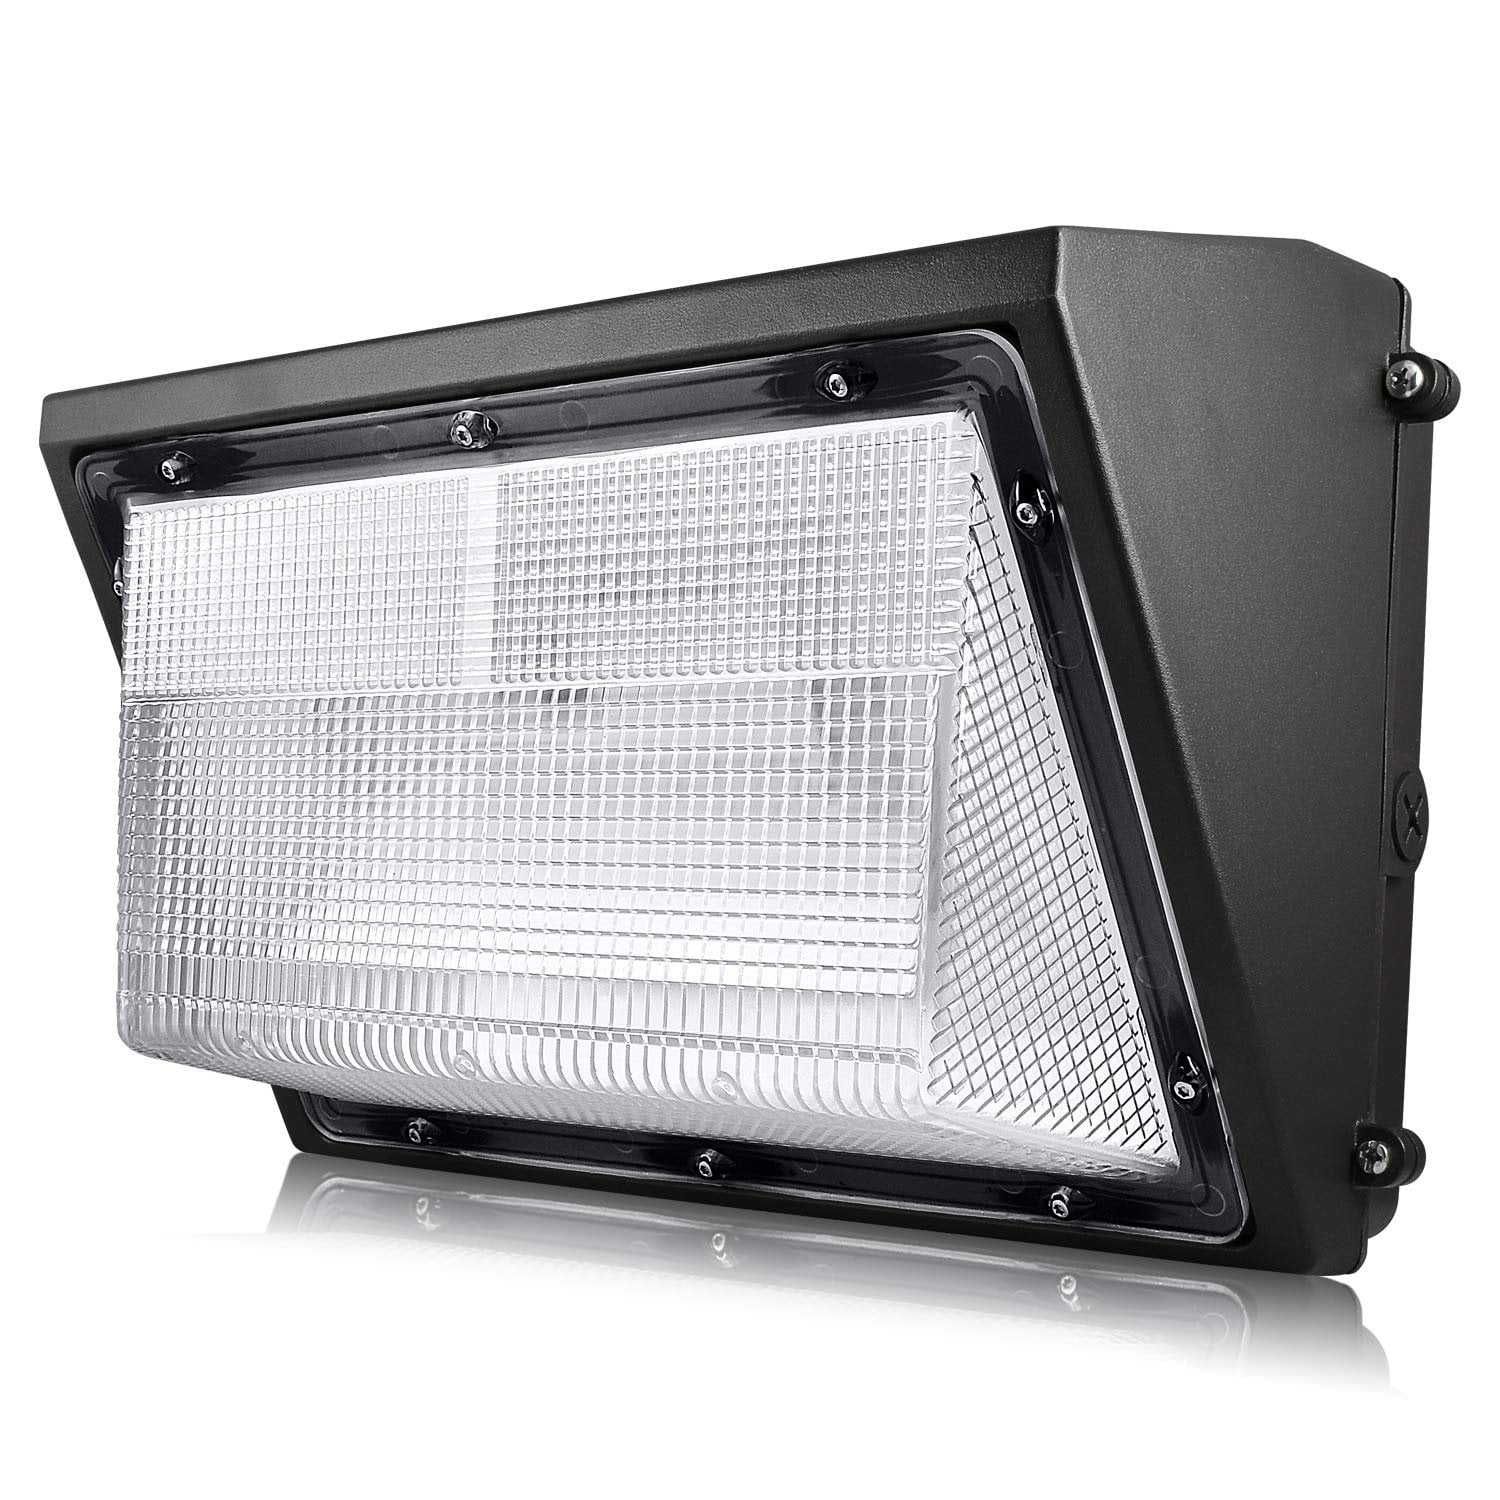 Luxrite 60W LED Wall Pack Light Fixture, 7085 Lumens, 250W HID/HPS Equivalent, 5000K Bright